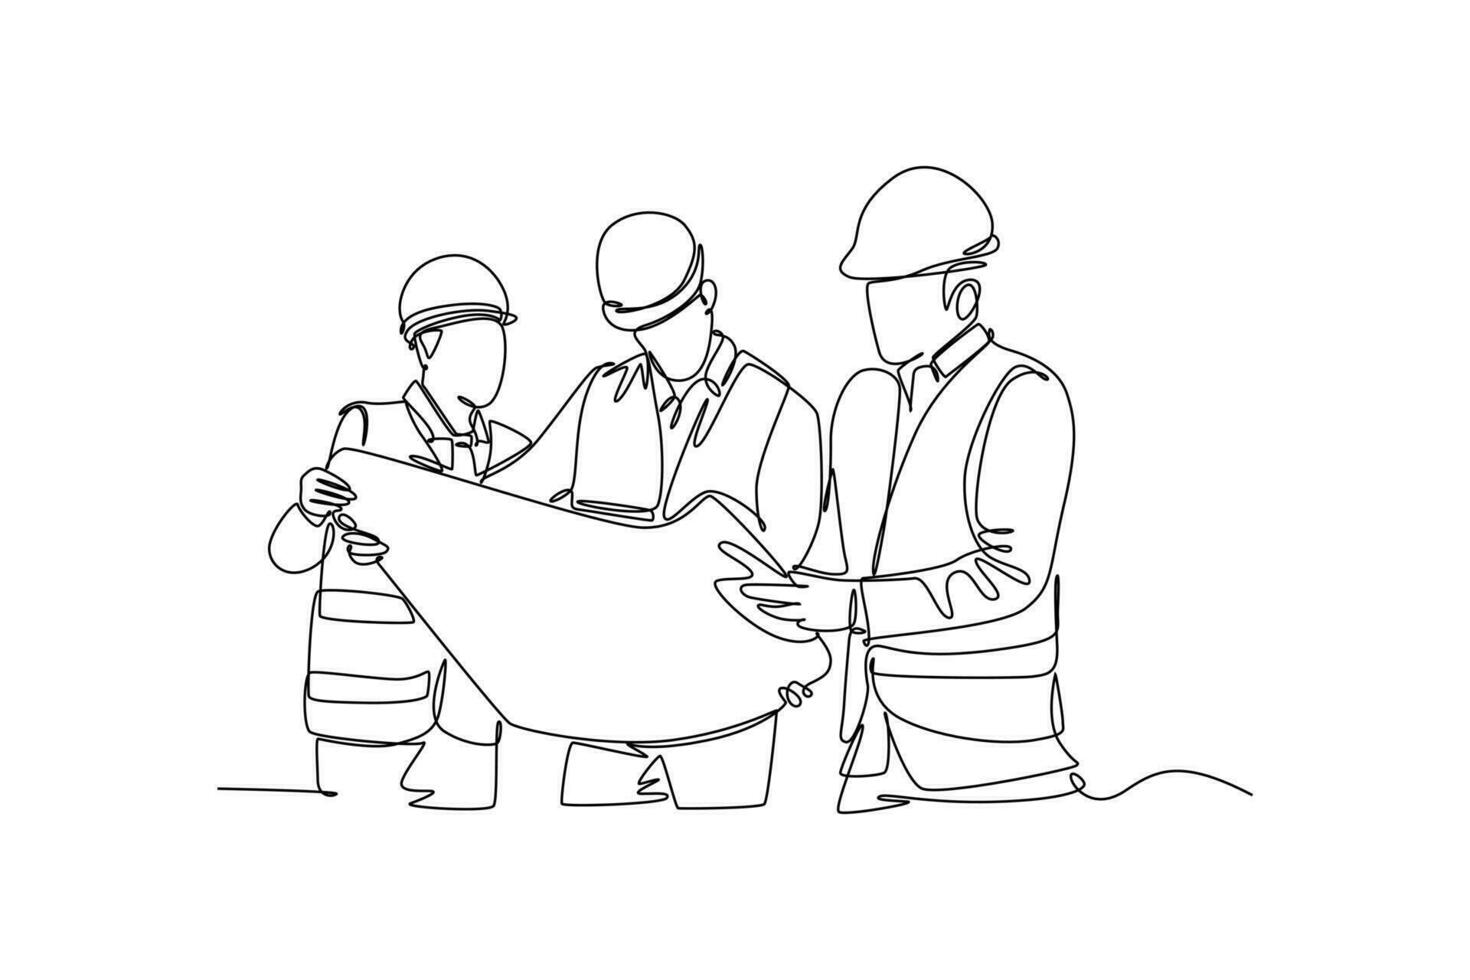 Single continuous line drawing of builder and architect wearing construction vest, helmet looking for building design on blue print together. Great teamwork. One line draw graphic vector illustration